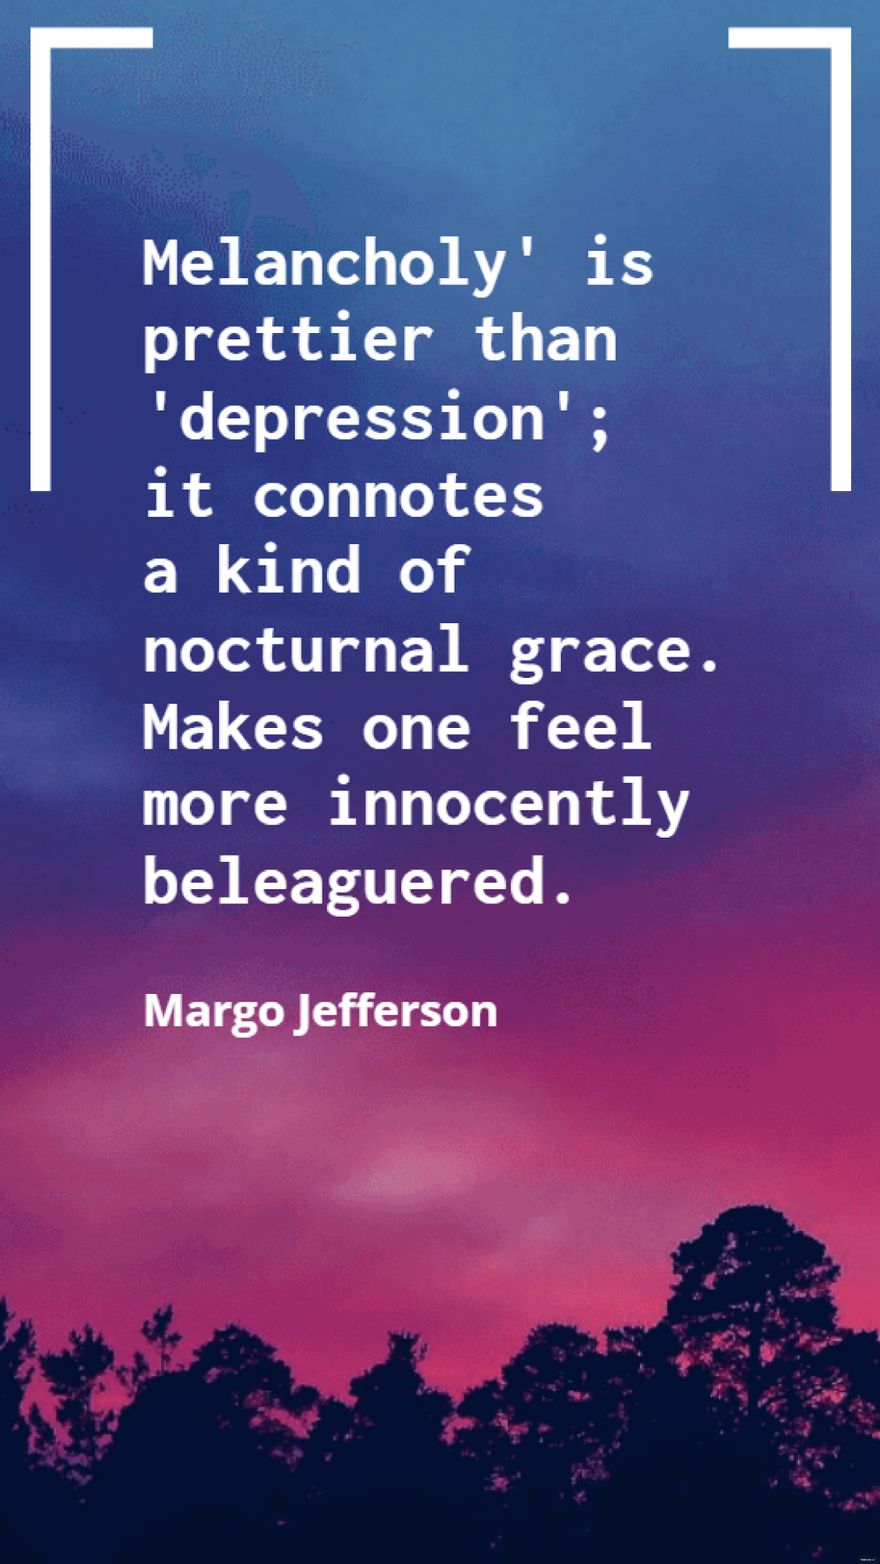 Margo Jefferson - Melancholy' is prettier than 'depression'; it connotes a kind of nocturnal grace. Makes one feel more innocently beleaguered.